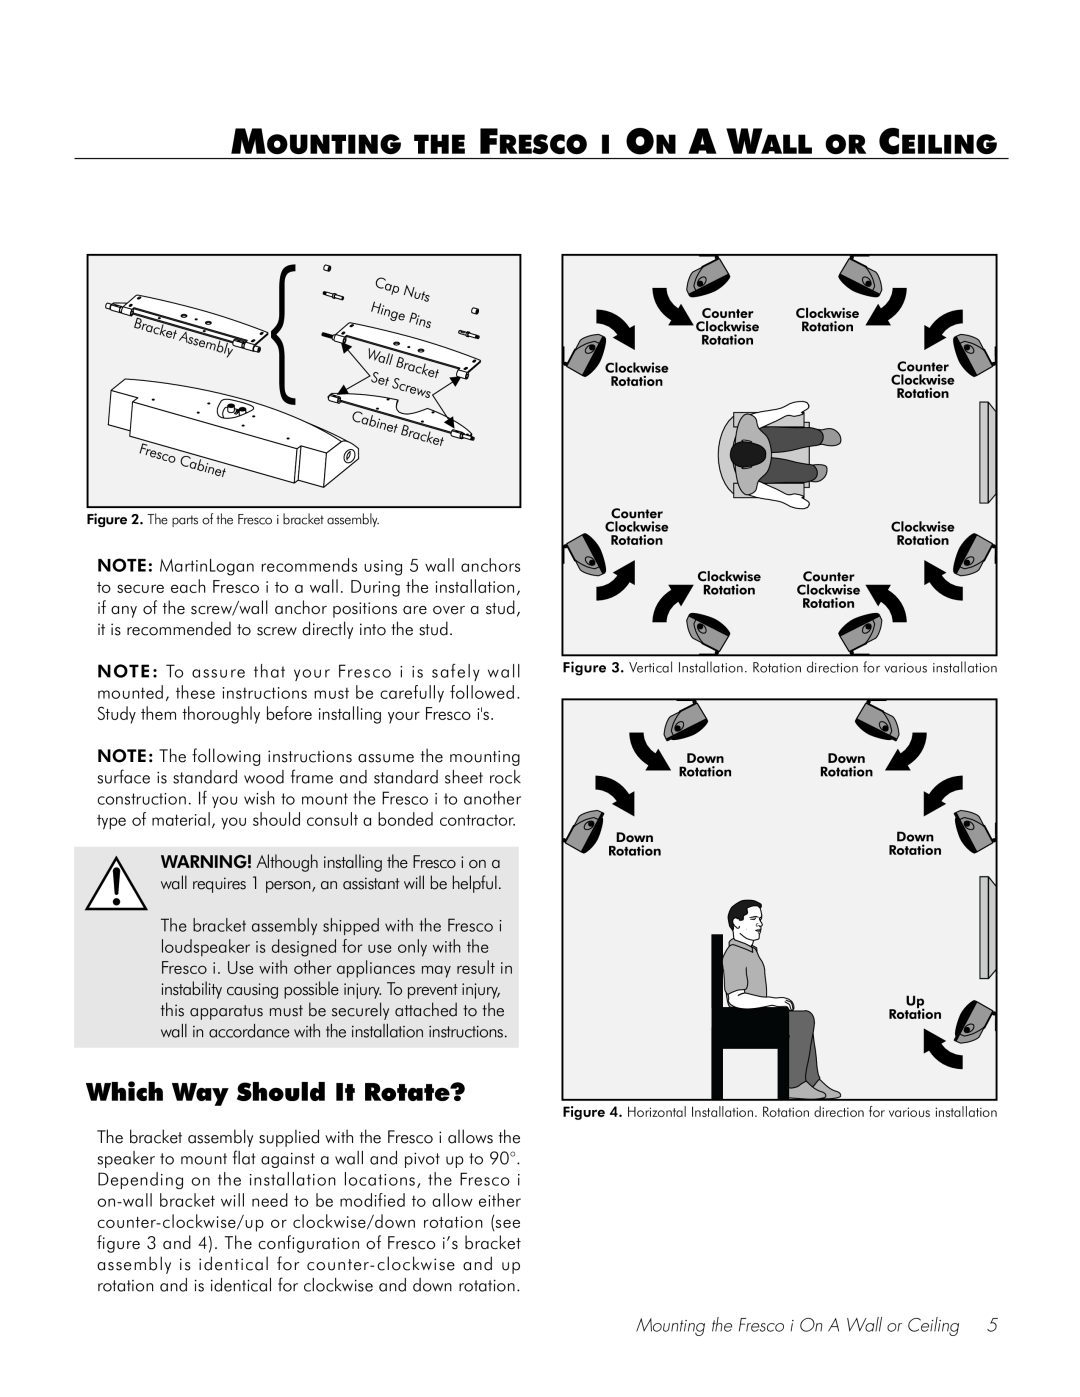 Fresco Speaker user manual Mounting The Fresco I On A Wall Or Ceiling, Which Way Should It Rotate? 